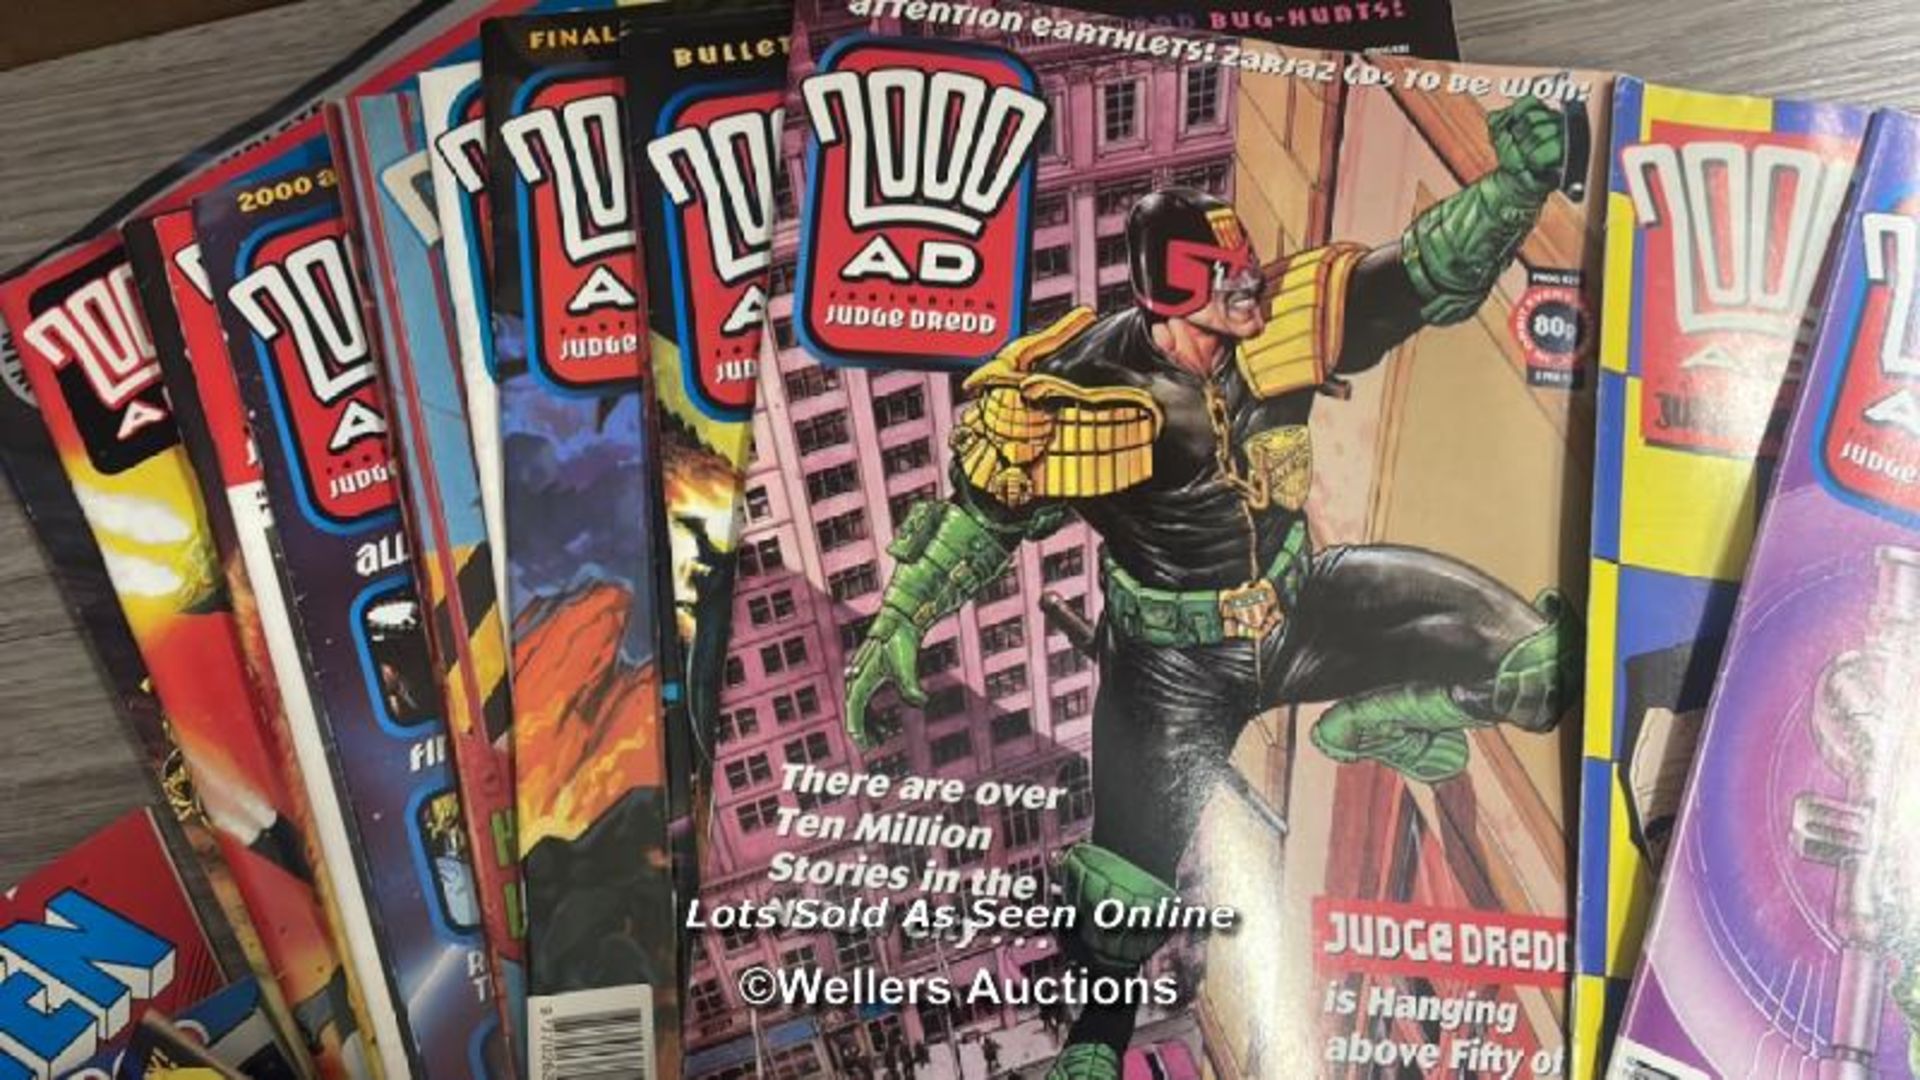 COLLECTION OF 200AD / JUDGE DREDD COMICS WITH THREE OTHER COMICS INCLUDING MARVEL (22) - Image 3 of 7